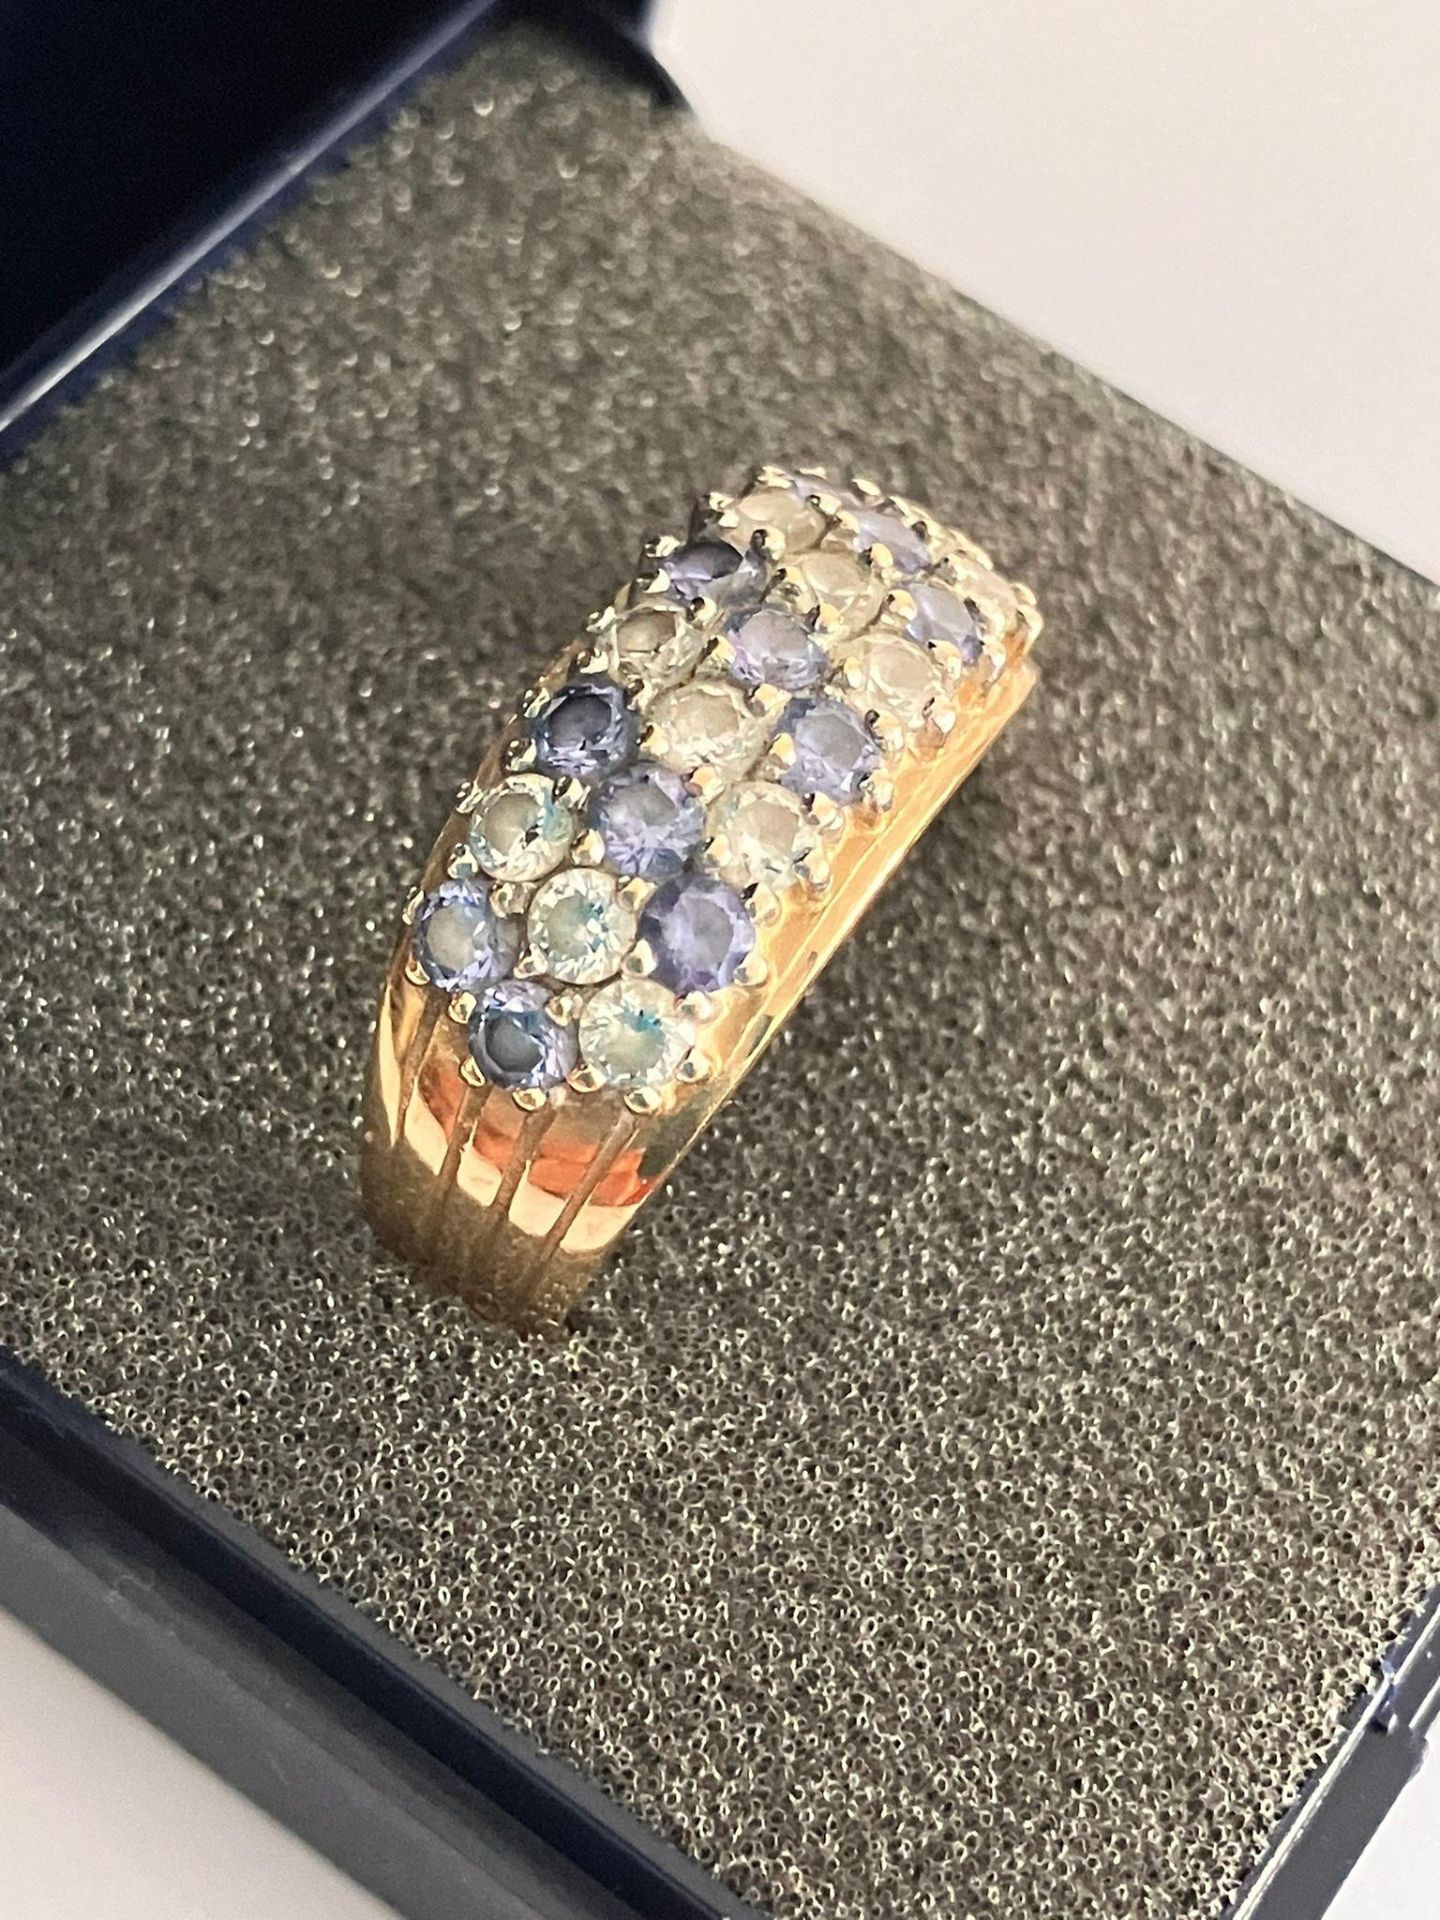 Magnificent 9 carat YELLOW GOLD RING set with BLUE and WHITE GEMSTONES. 3.75 grams. Size R. - Image 3 of 3